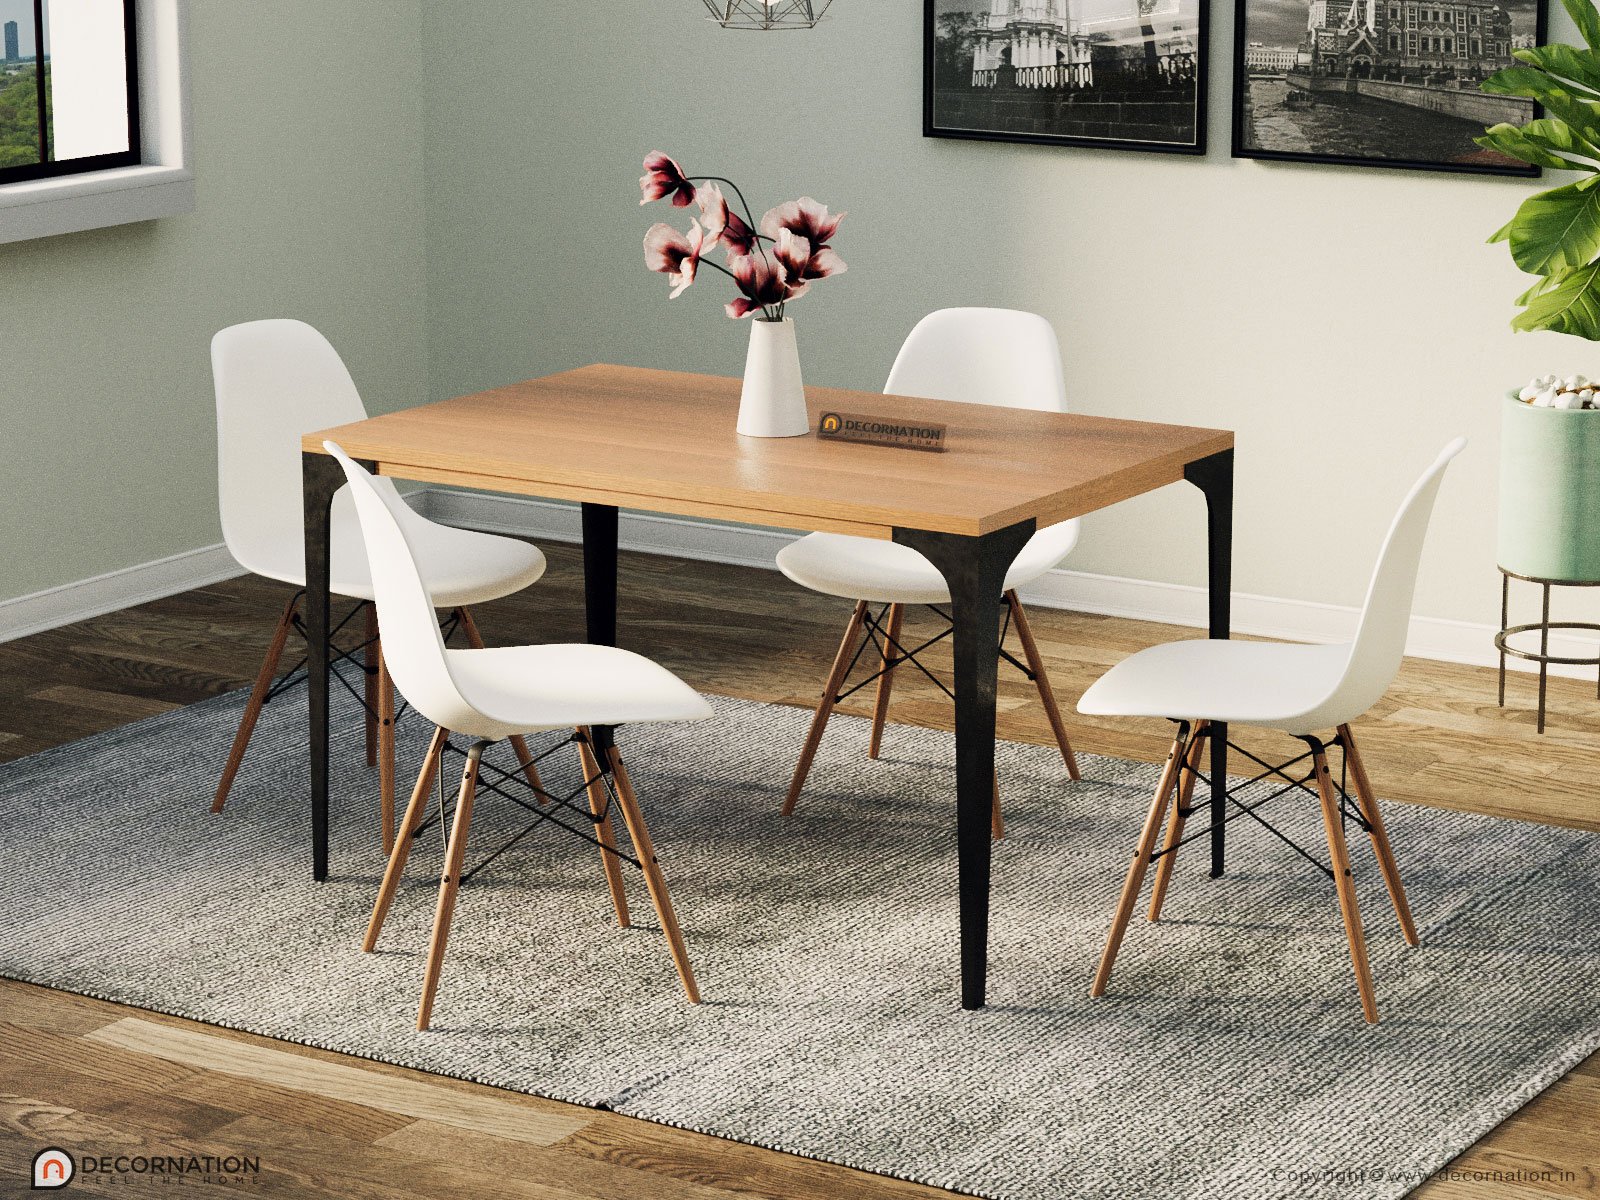 Turno Solid Top 6 Seater Dining Table Set – 4 Seater